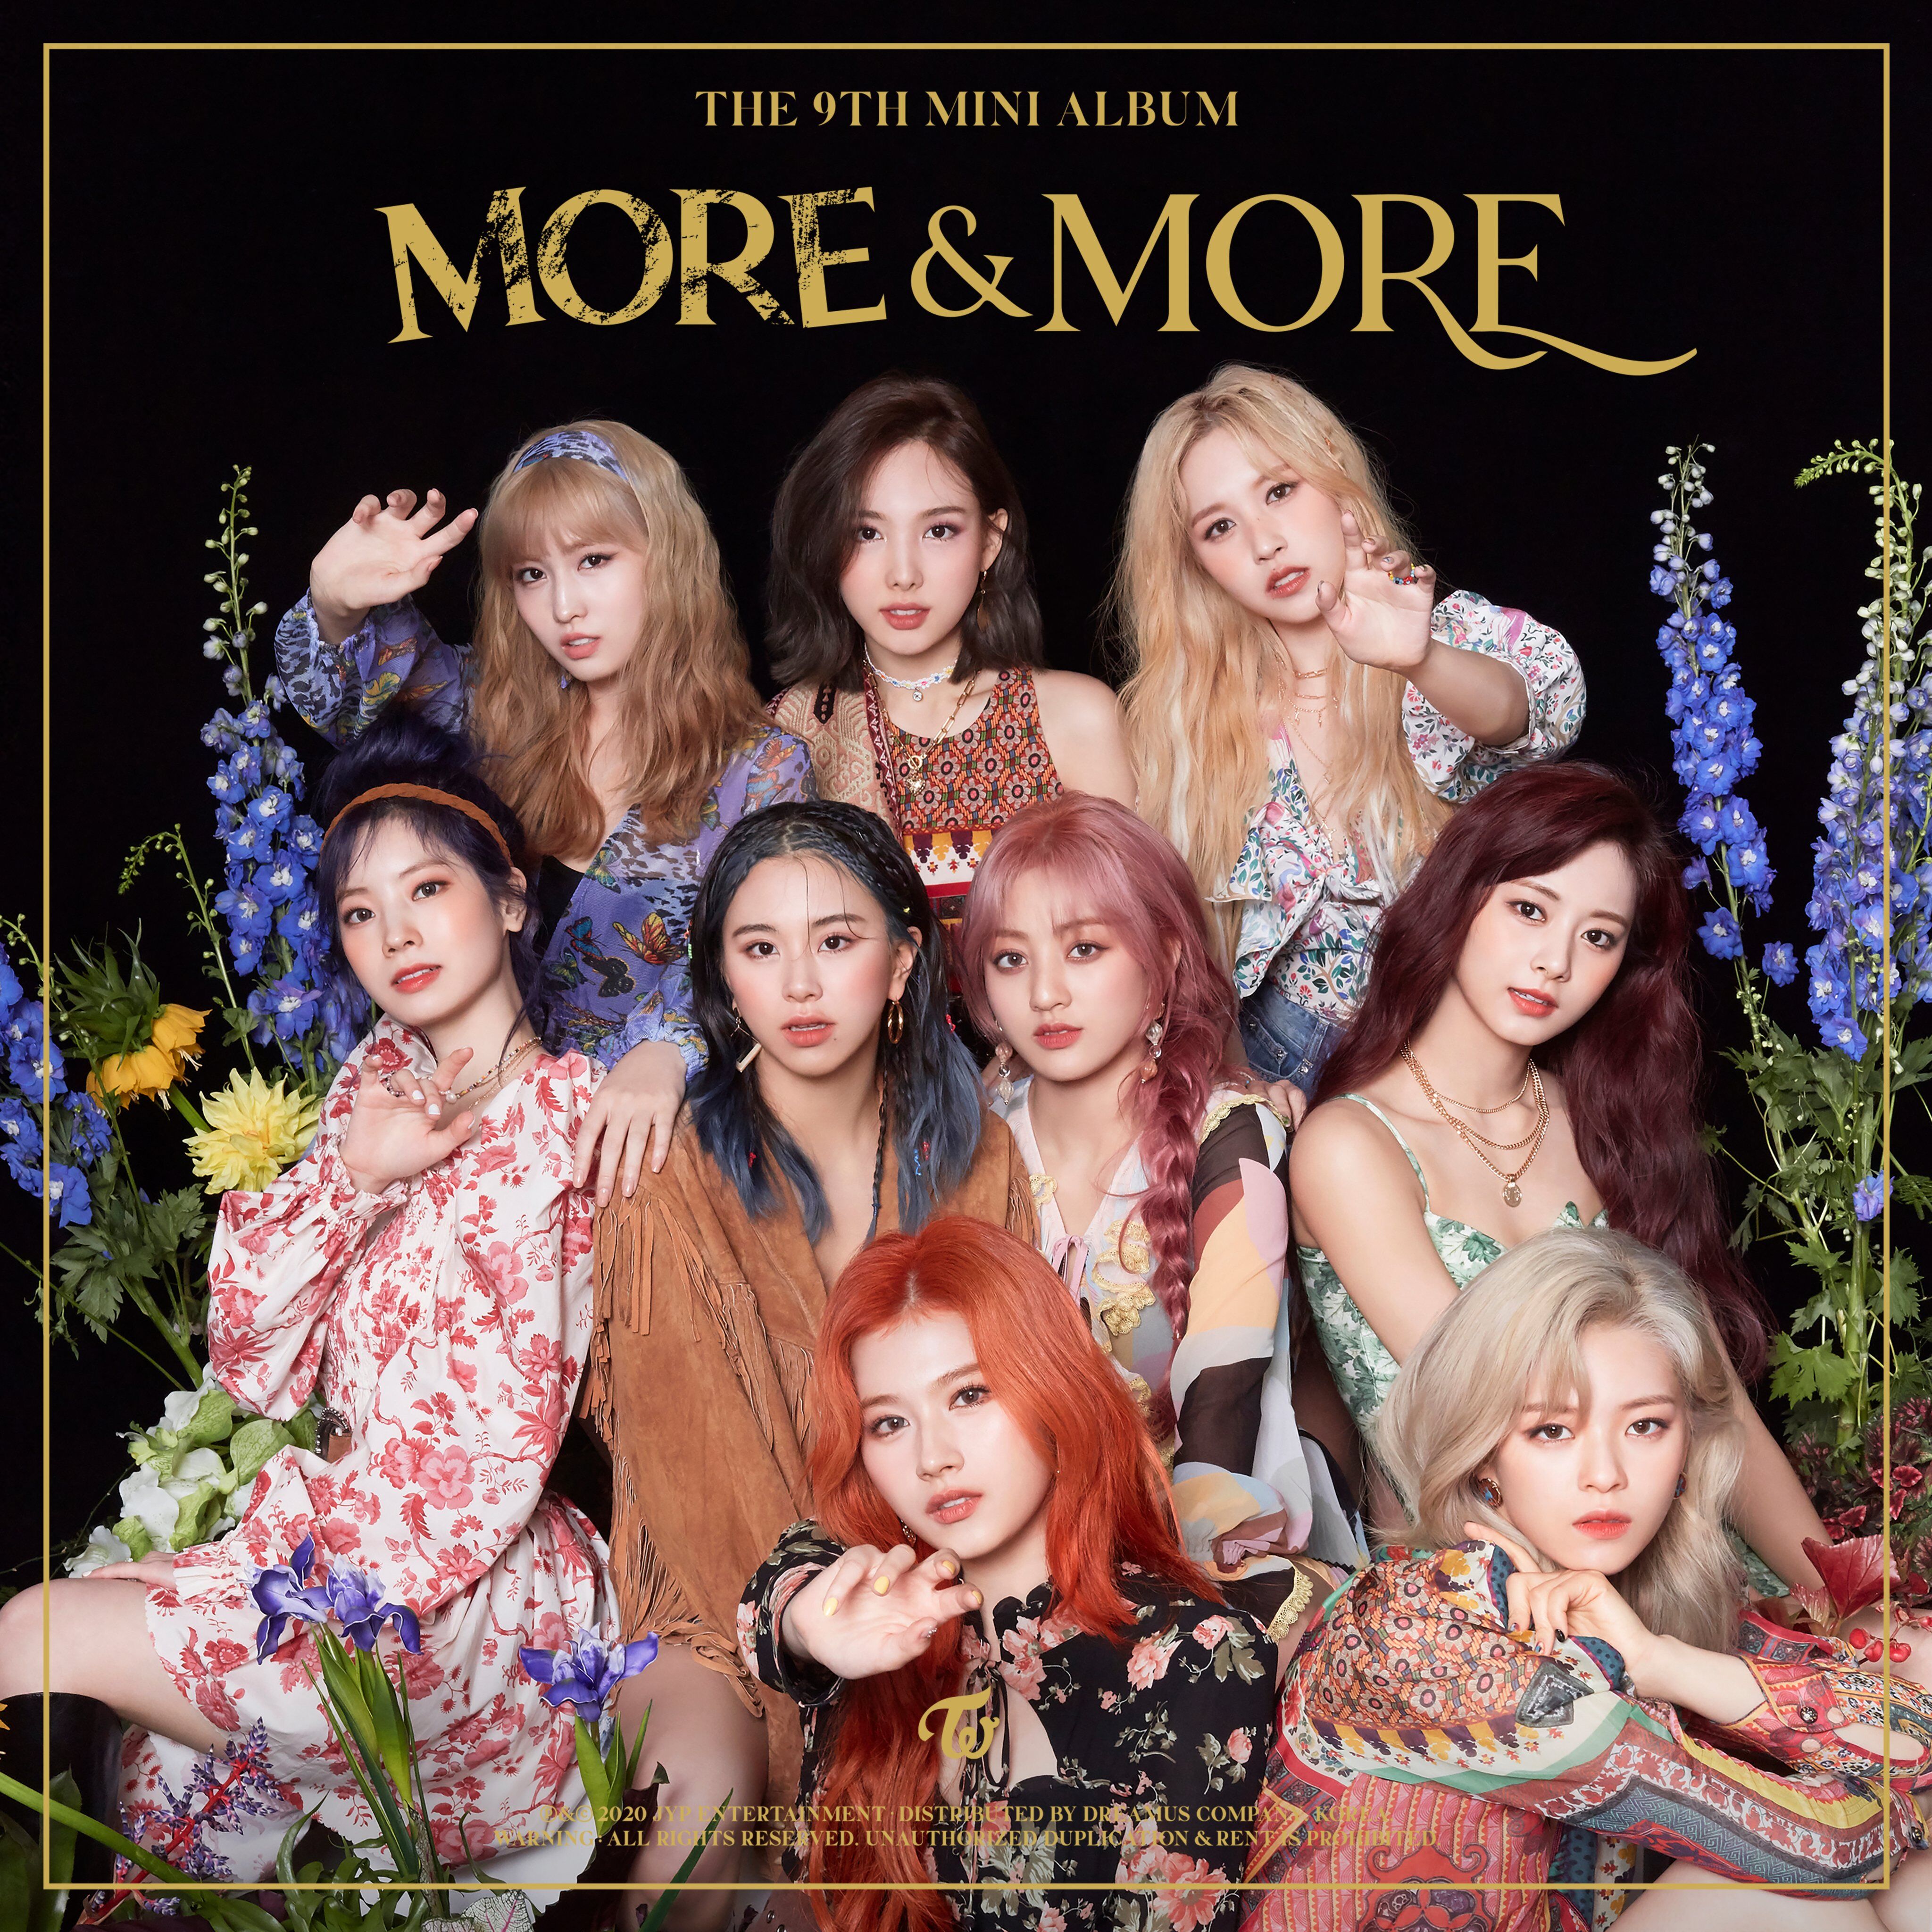 Discography, Twice Wiki